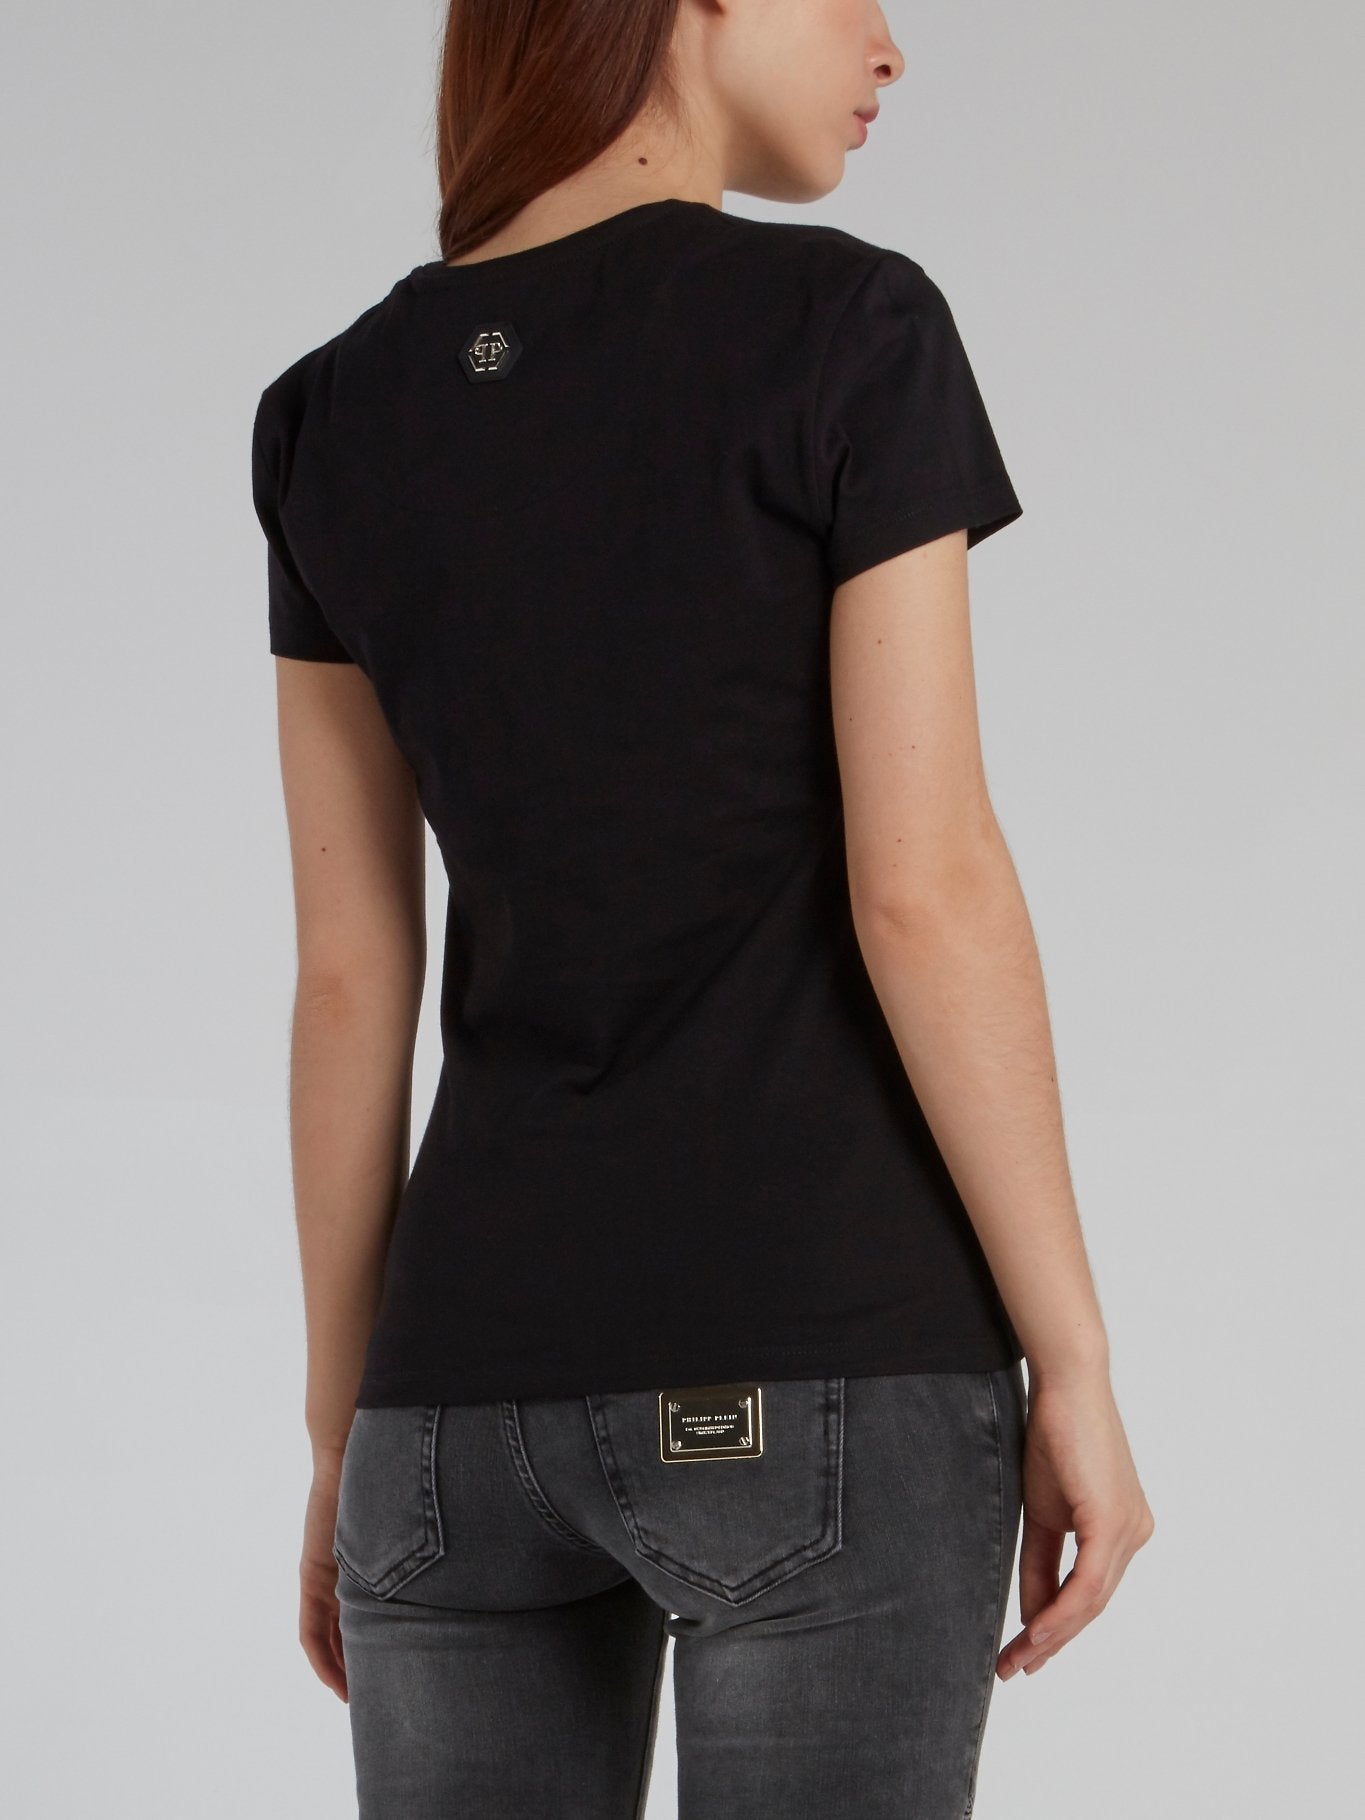 Black Statement Fitted T-Shirt